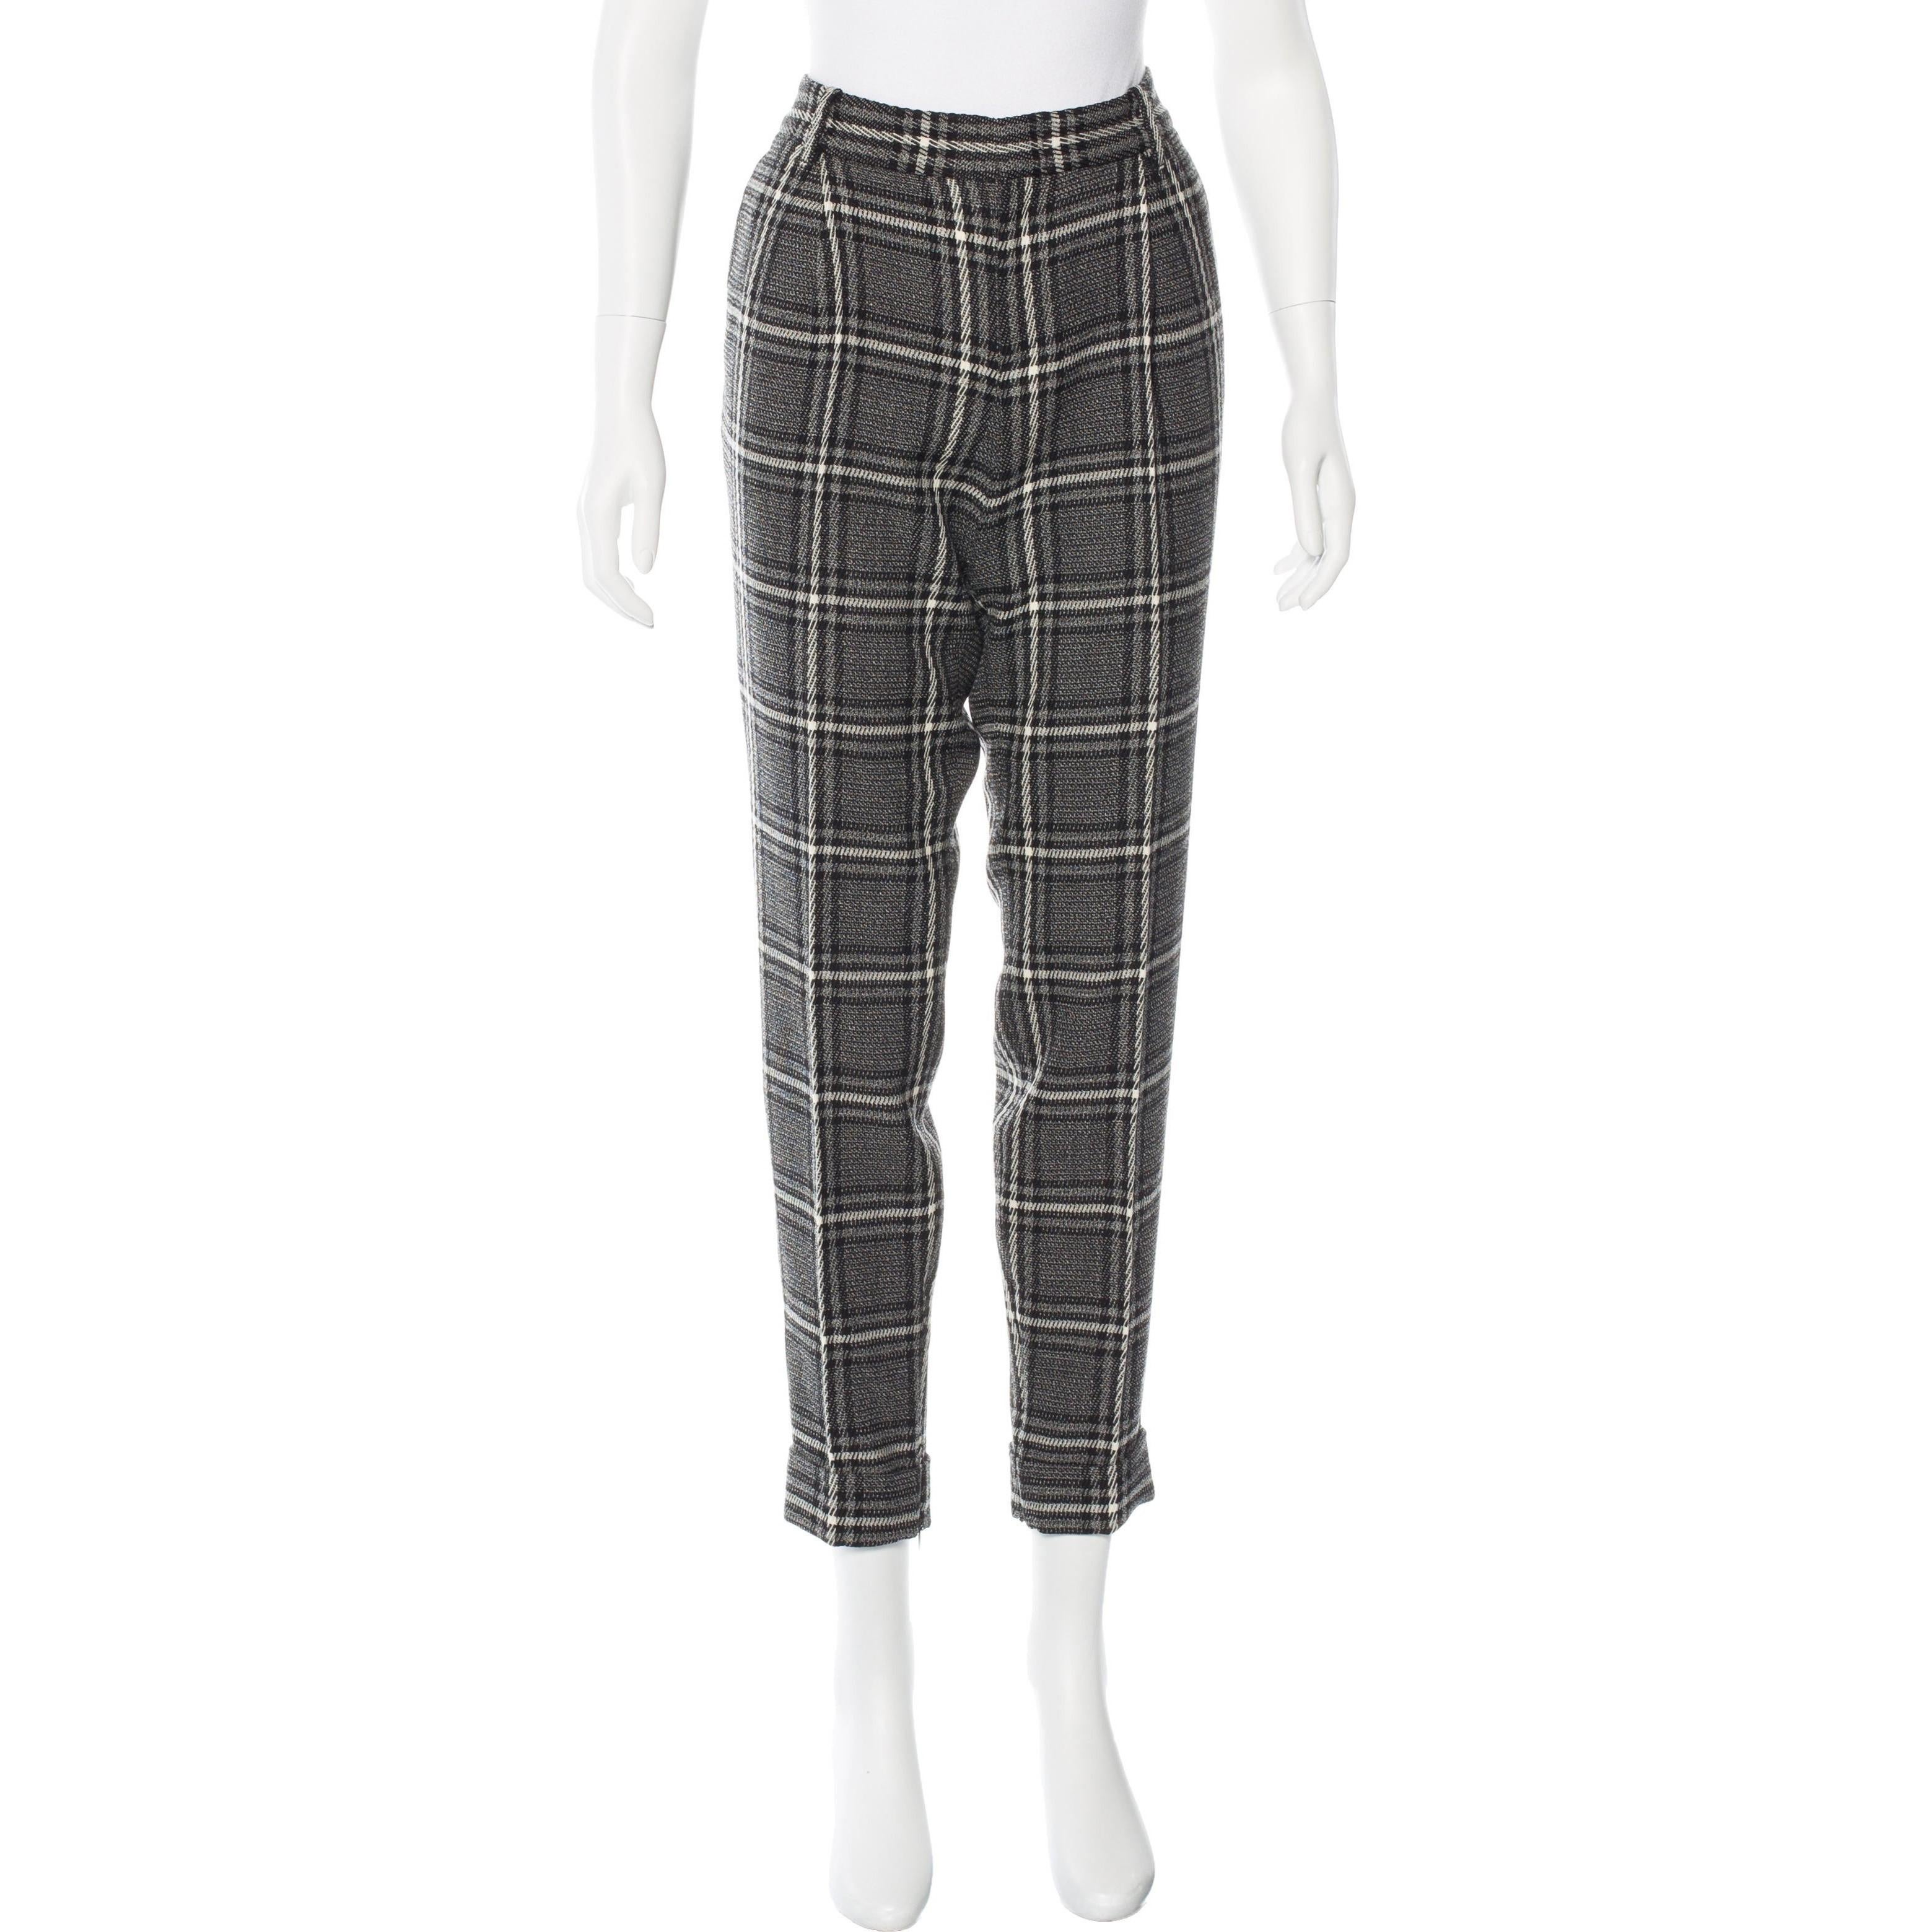 Gucci Wool Plaid Pants
Brand New without Tags
* Gucci Wool Plaid Pants
* Dual pockets at hips
* Dual welt pockets at back
* Italian Size: 44
   Waist:  34